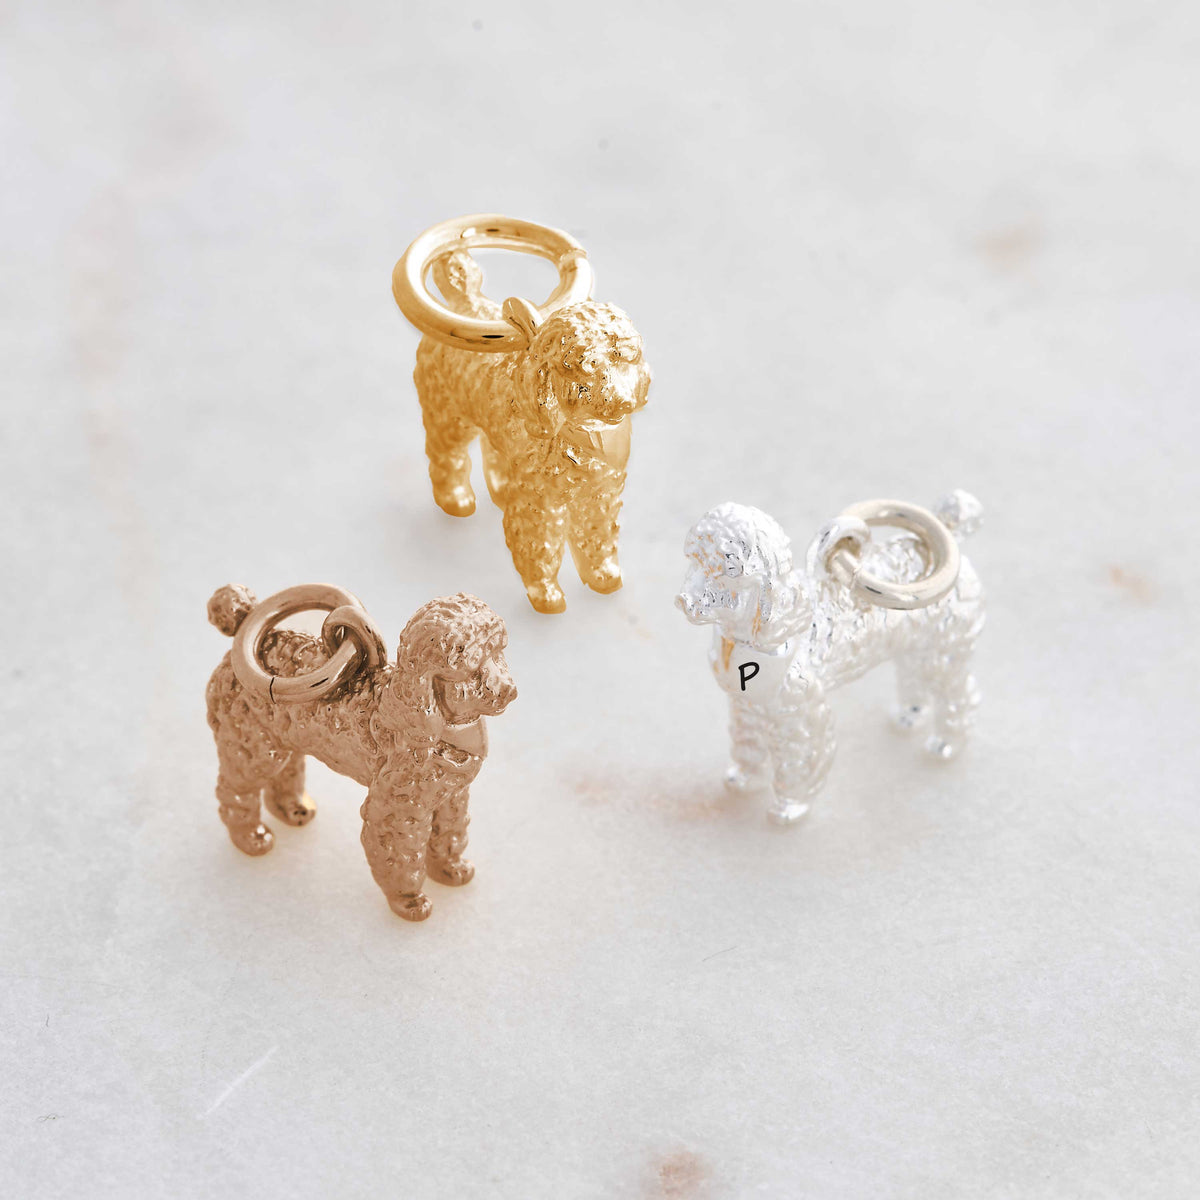 poodle charms engraved scarlett jewellery